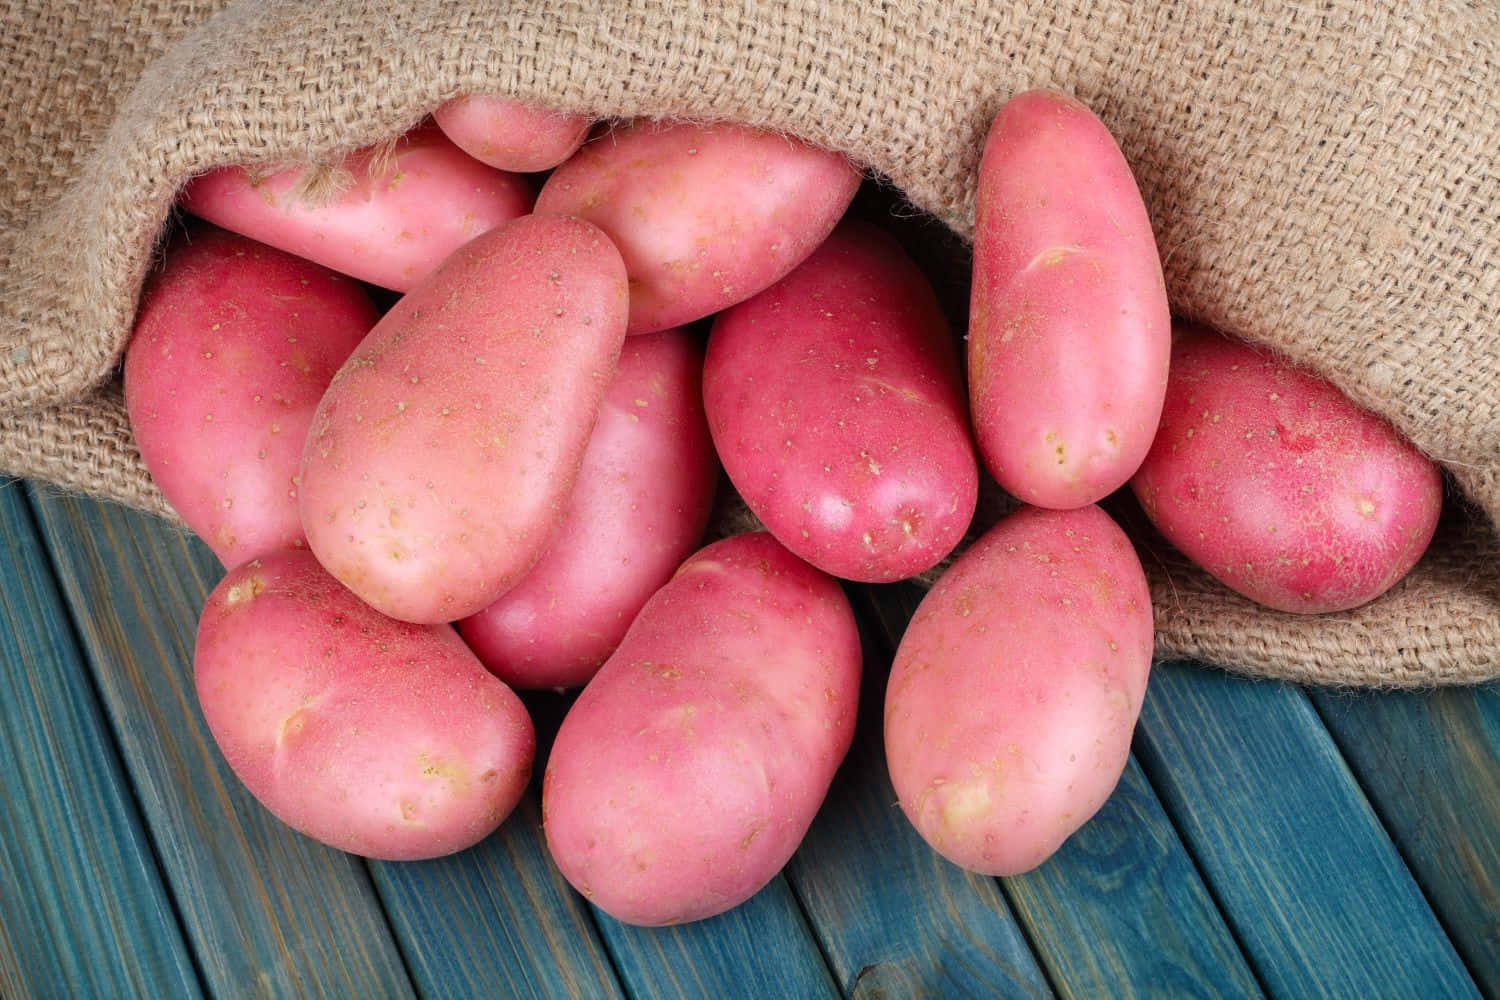 Fresh red potatoes on a rustic wooden surface Wallpaper